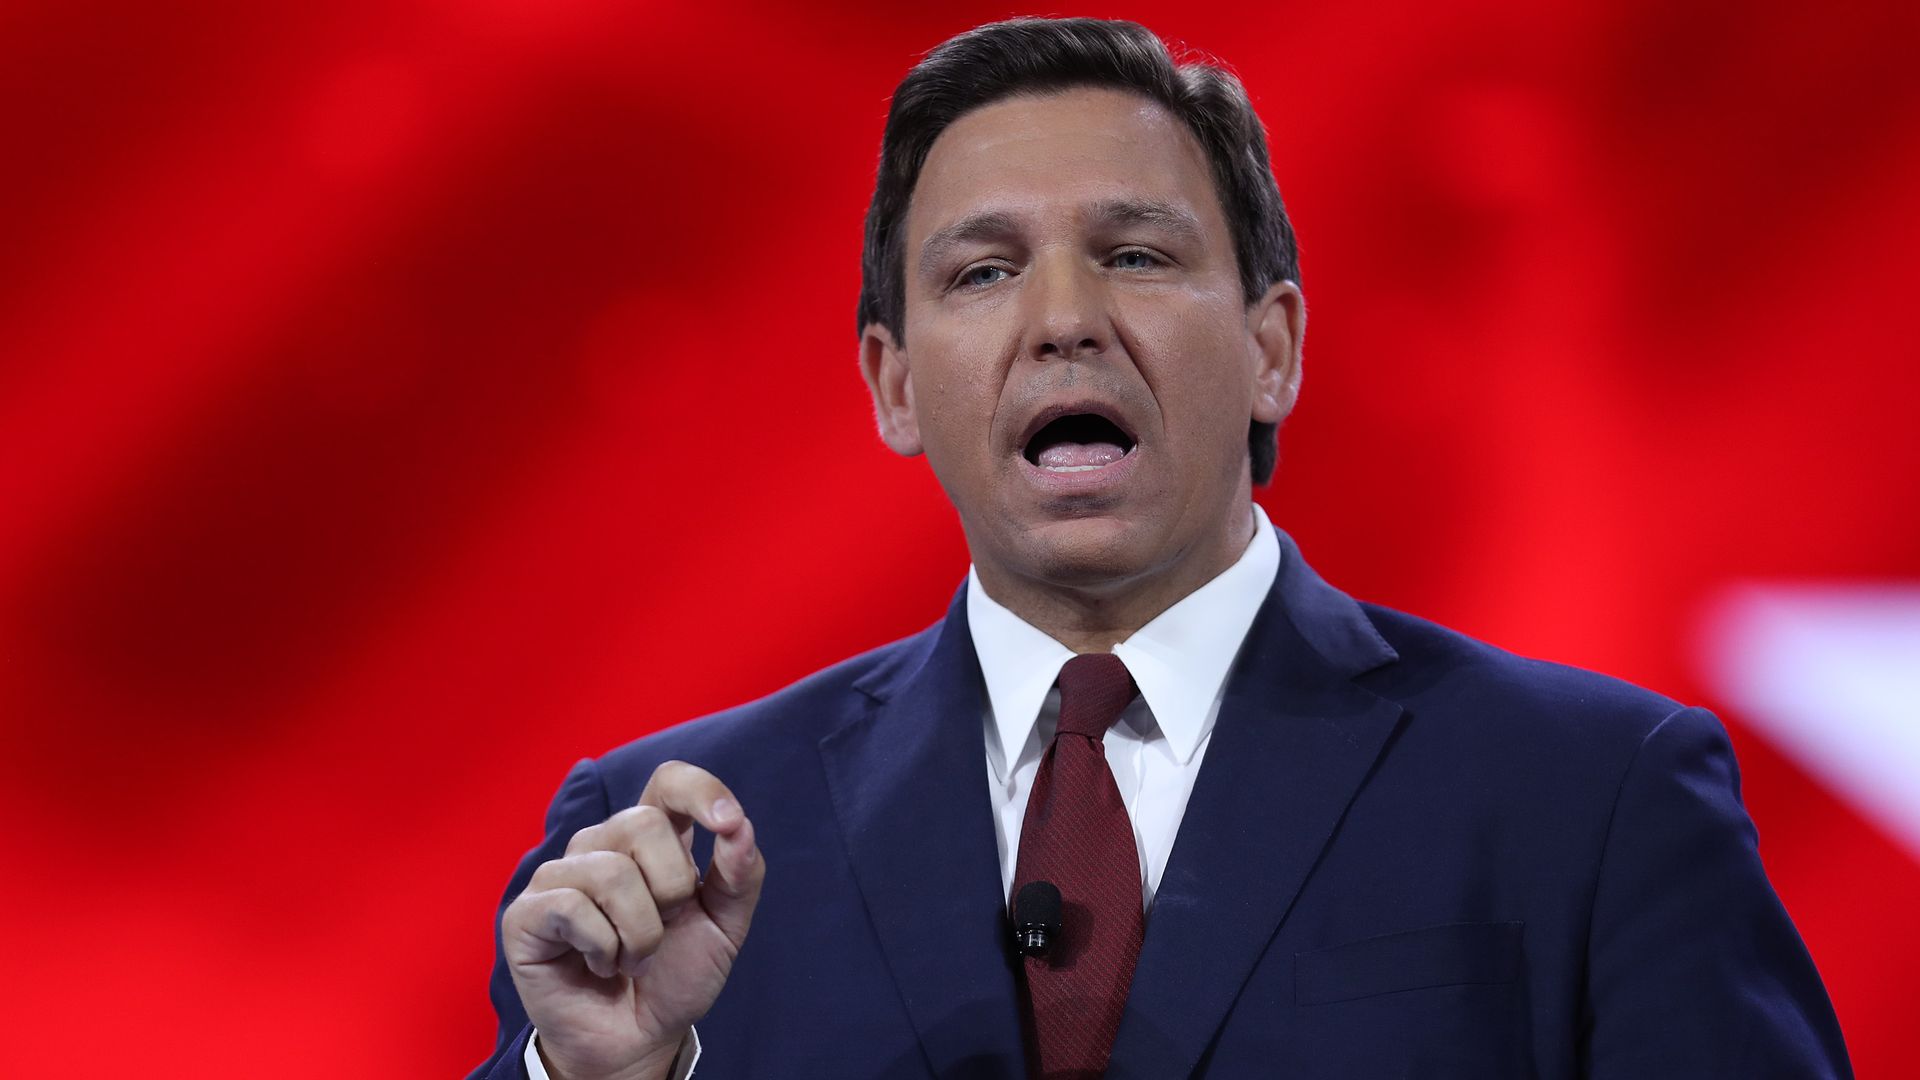 Florida Gov. Ron DeSantis speaks at the opening of the Conservative Political Action Conference at the Hyatt Regency on February 26, 2021 in Orlando, Florida. 